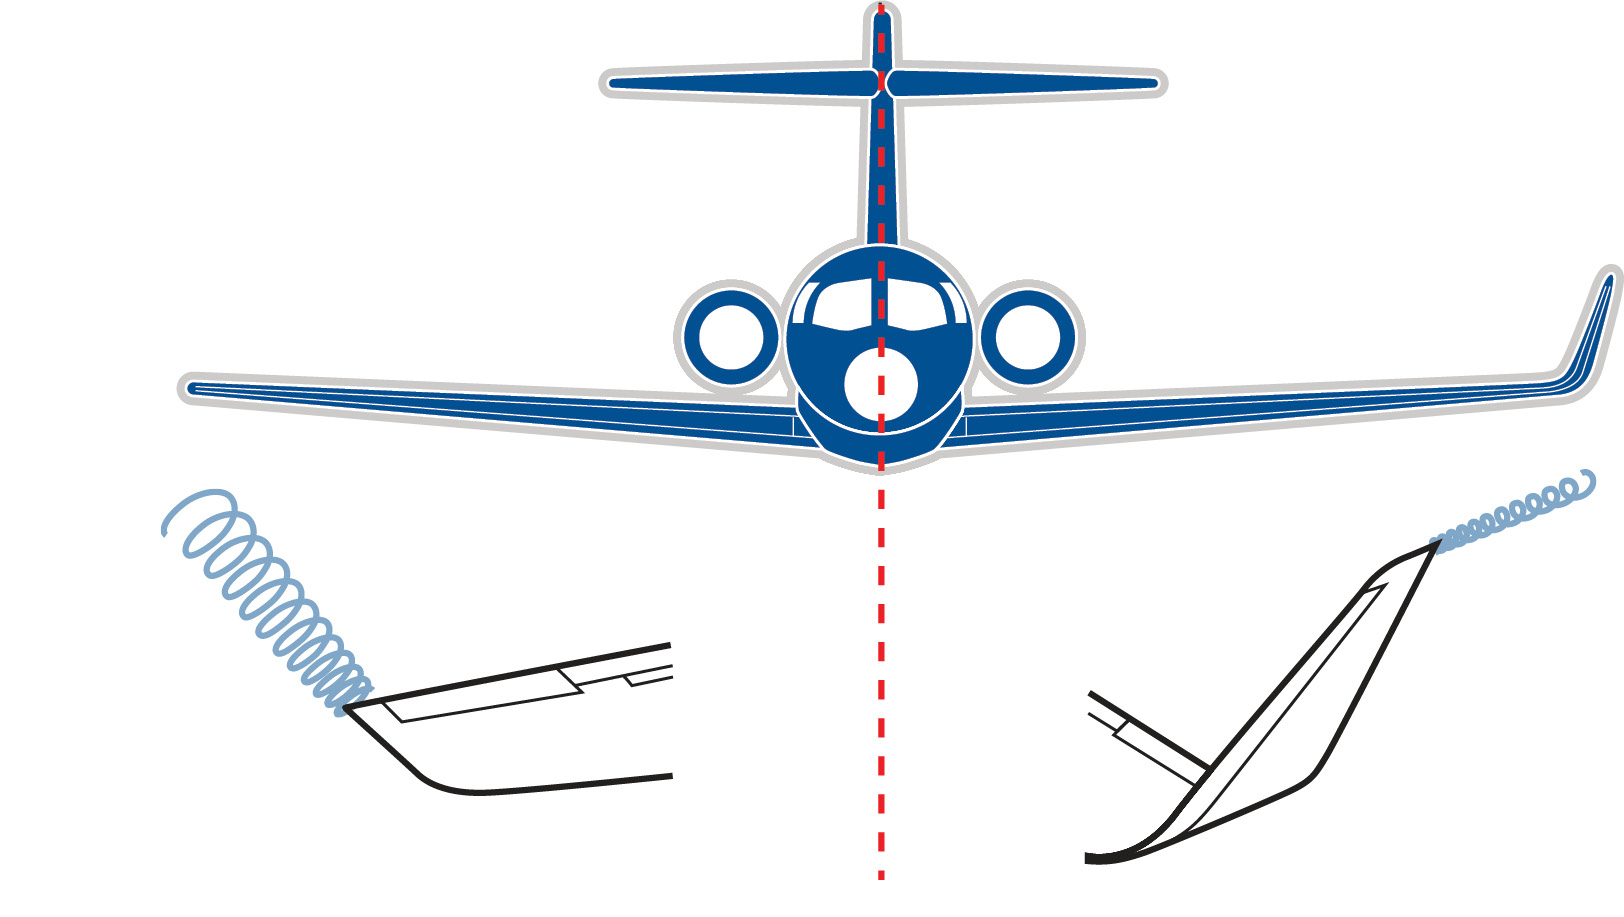 The Science Behind Aircraft Winglets Revealed